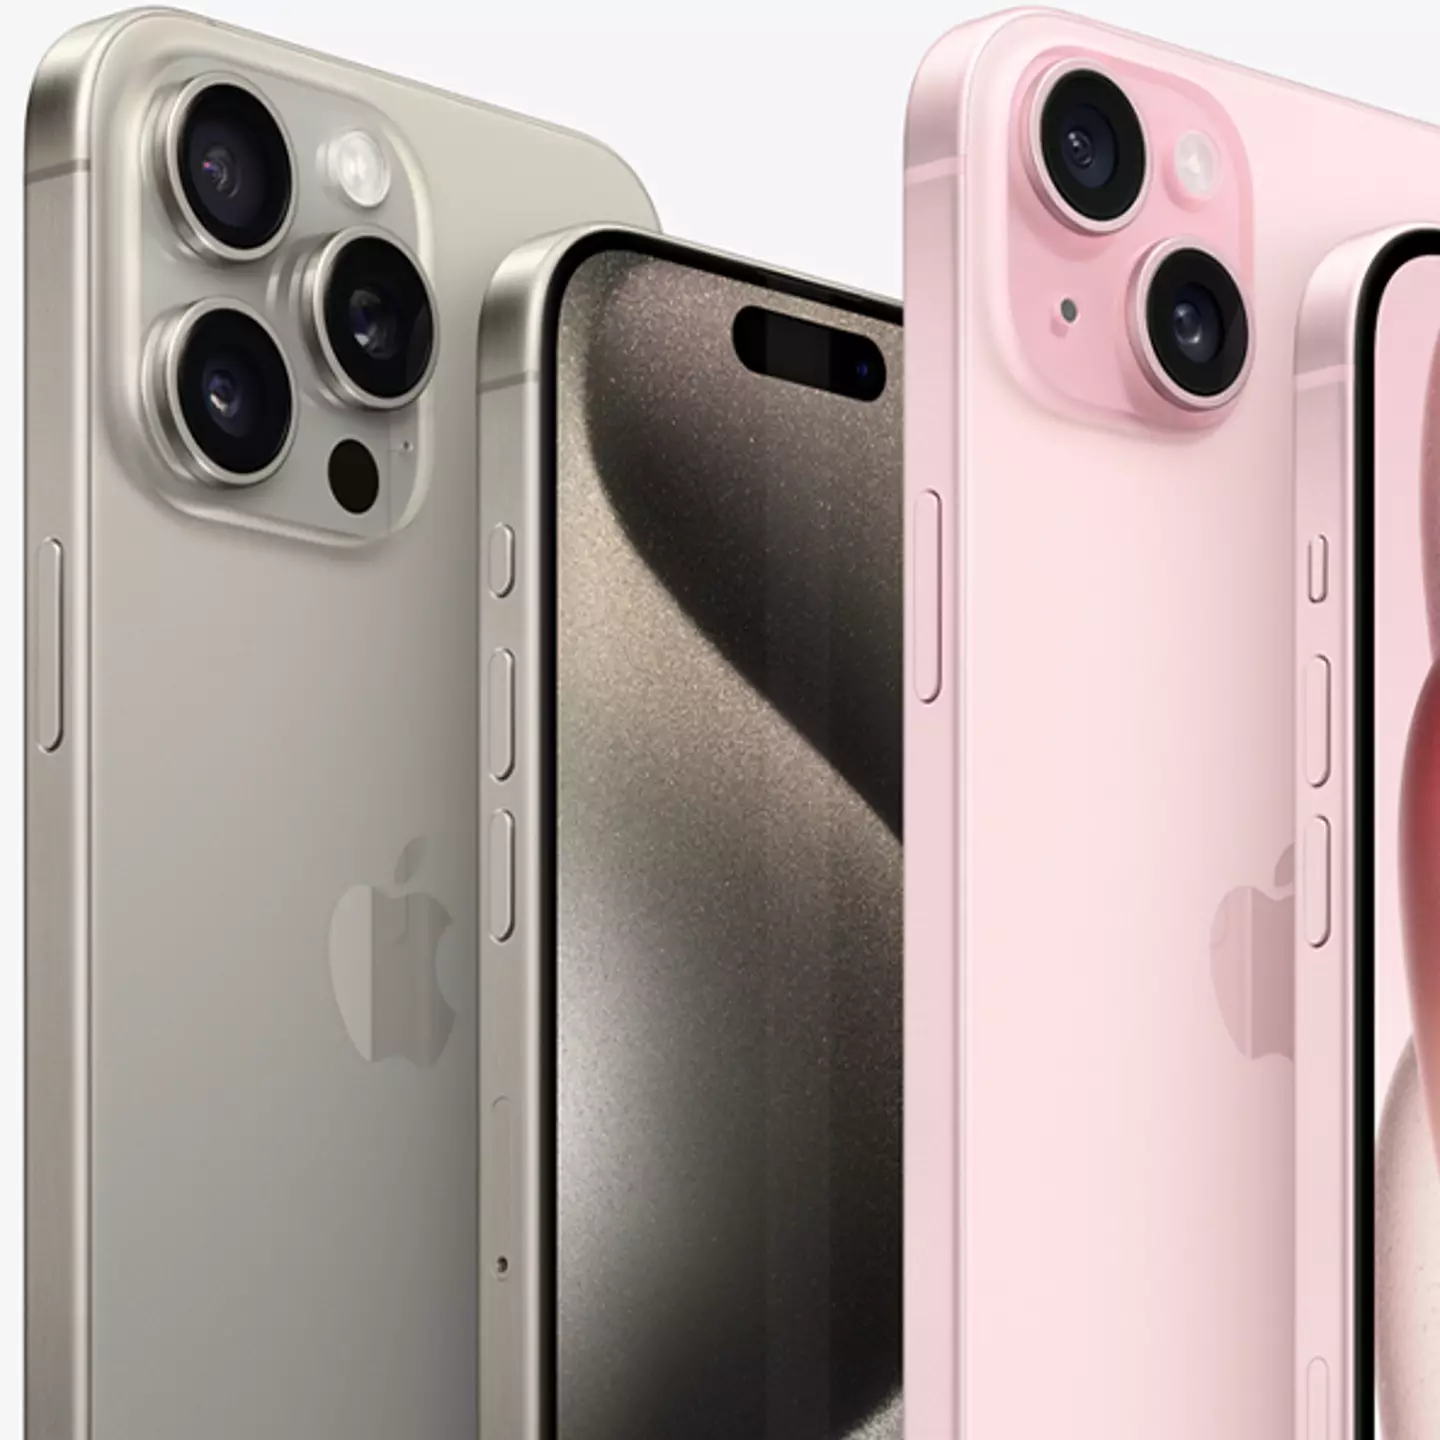 Apple Trade In is currently offering its highest prices for your old iPhone but it's not for long